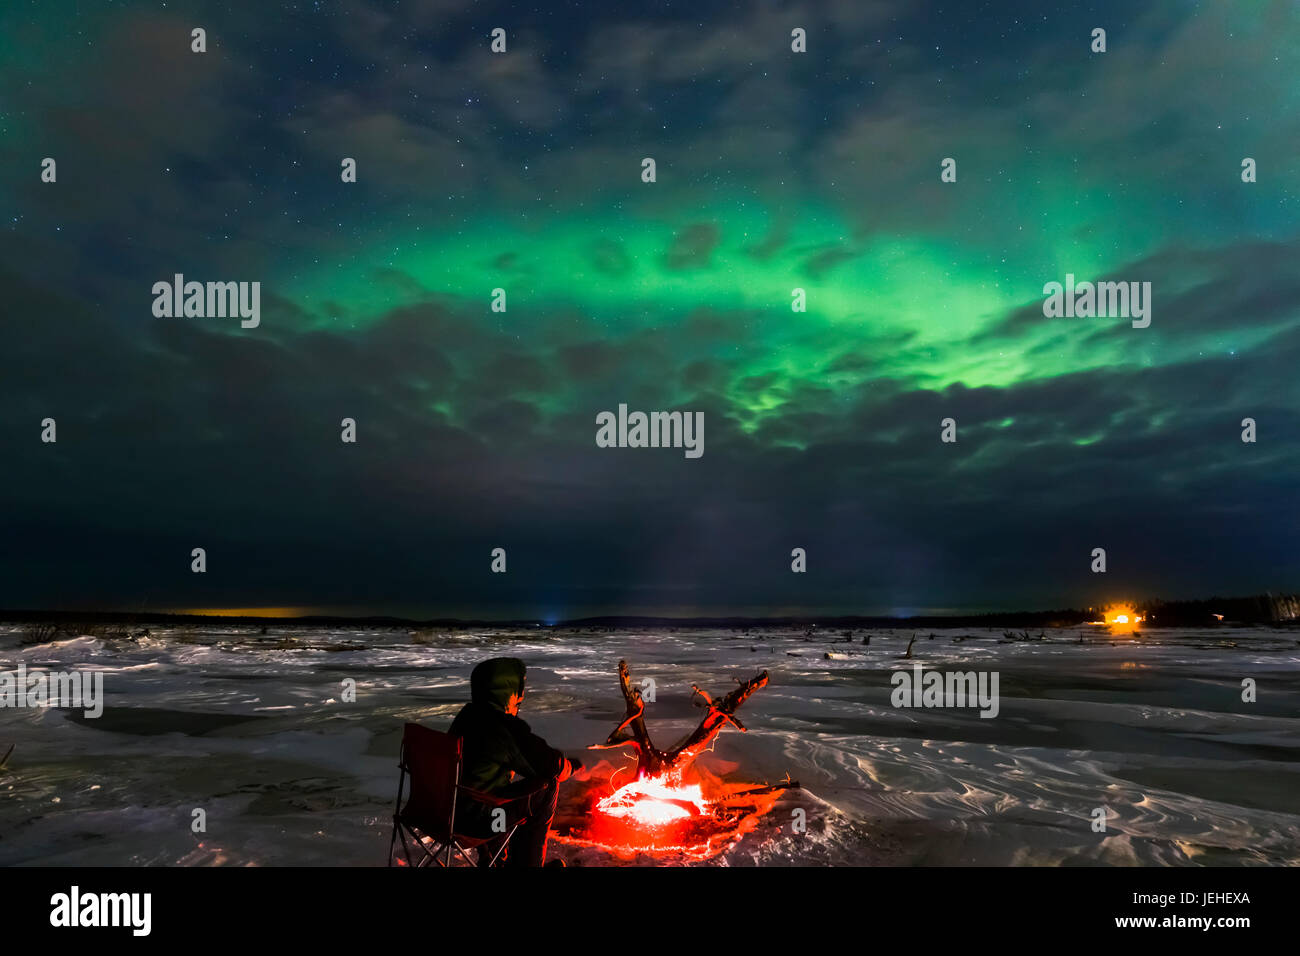 A man warms himself beside a driftwood fire while watching the aurora through clouds on the frozen Delta River, near Delta Junction, Alaska. Stock Photo